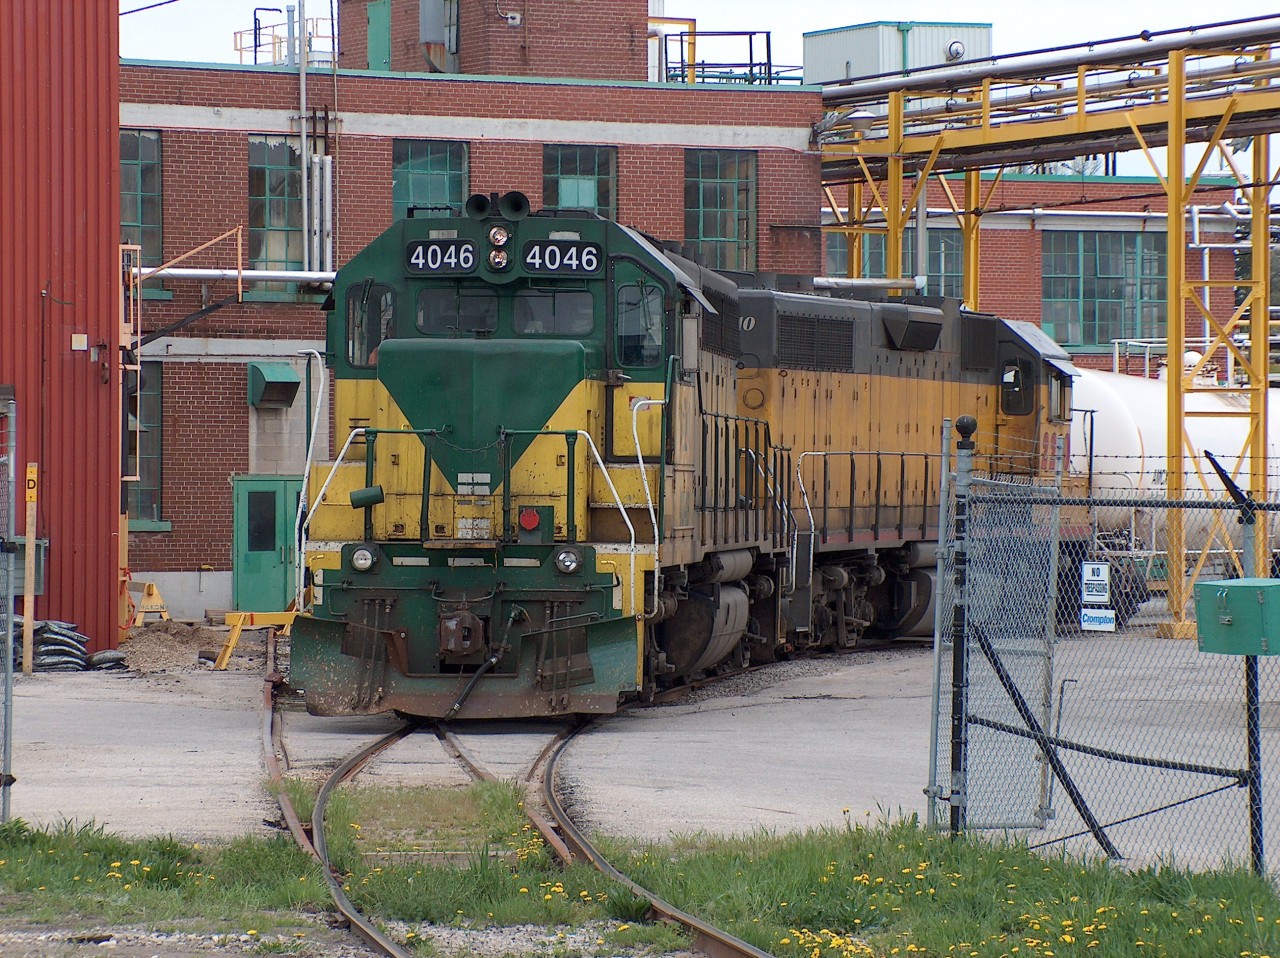 Here is a view of GEXR operations in Elmira back in the spring of 2007: the local from Kitchener Yard to Elmira is captured switching an industrial facility. A recent Google search indicated that this facility is called Canada Colors and Chemicals (lots of VOCs). I cannot remember this train symbol but the power was GEXR 4046 and LLPX 2210.